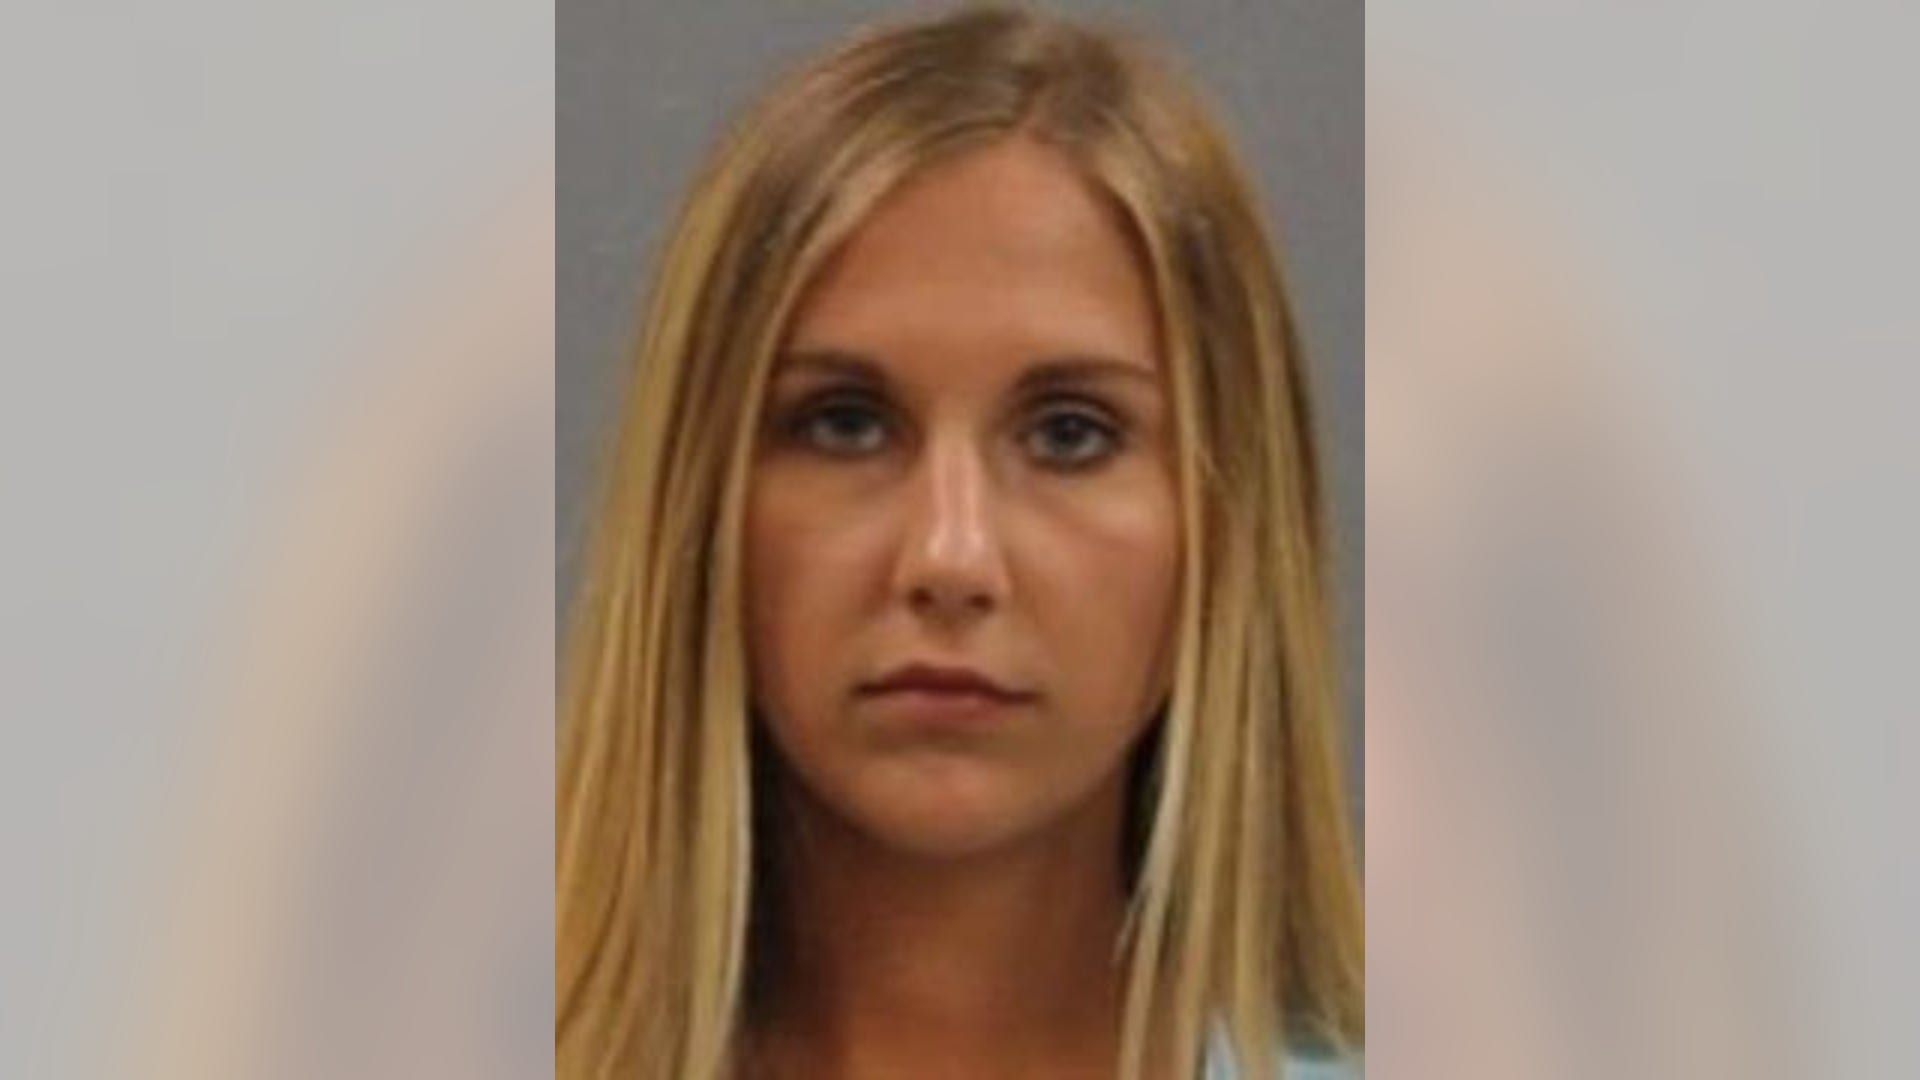 Female teachers charged or convicted of having sex with students | Fox News